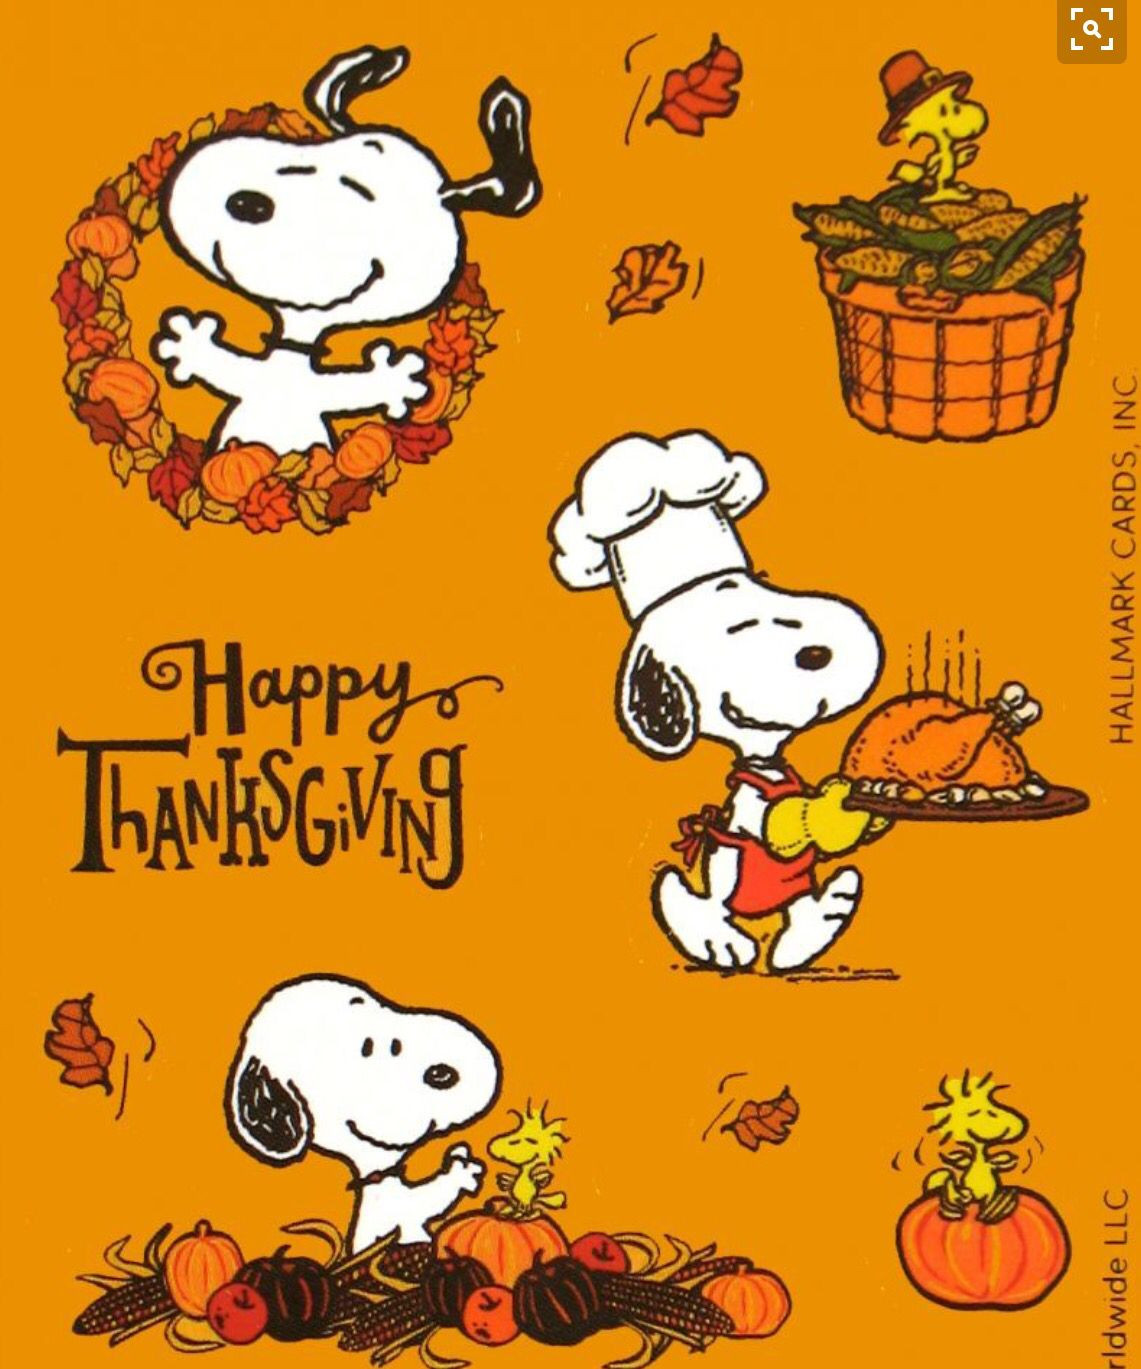 Thanksgiving Quotes Peanuts
 Top 30 Thanksgiving Quotes Snoopy Home Family Style